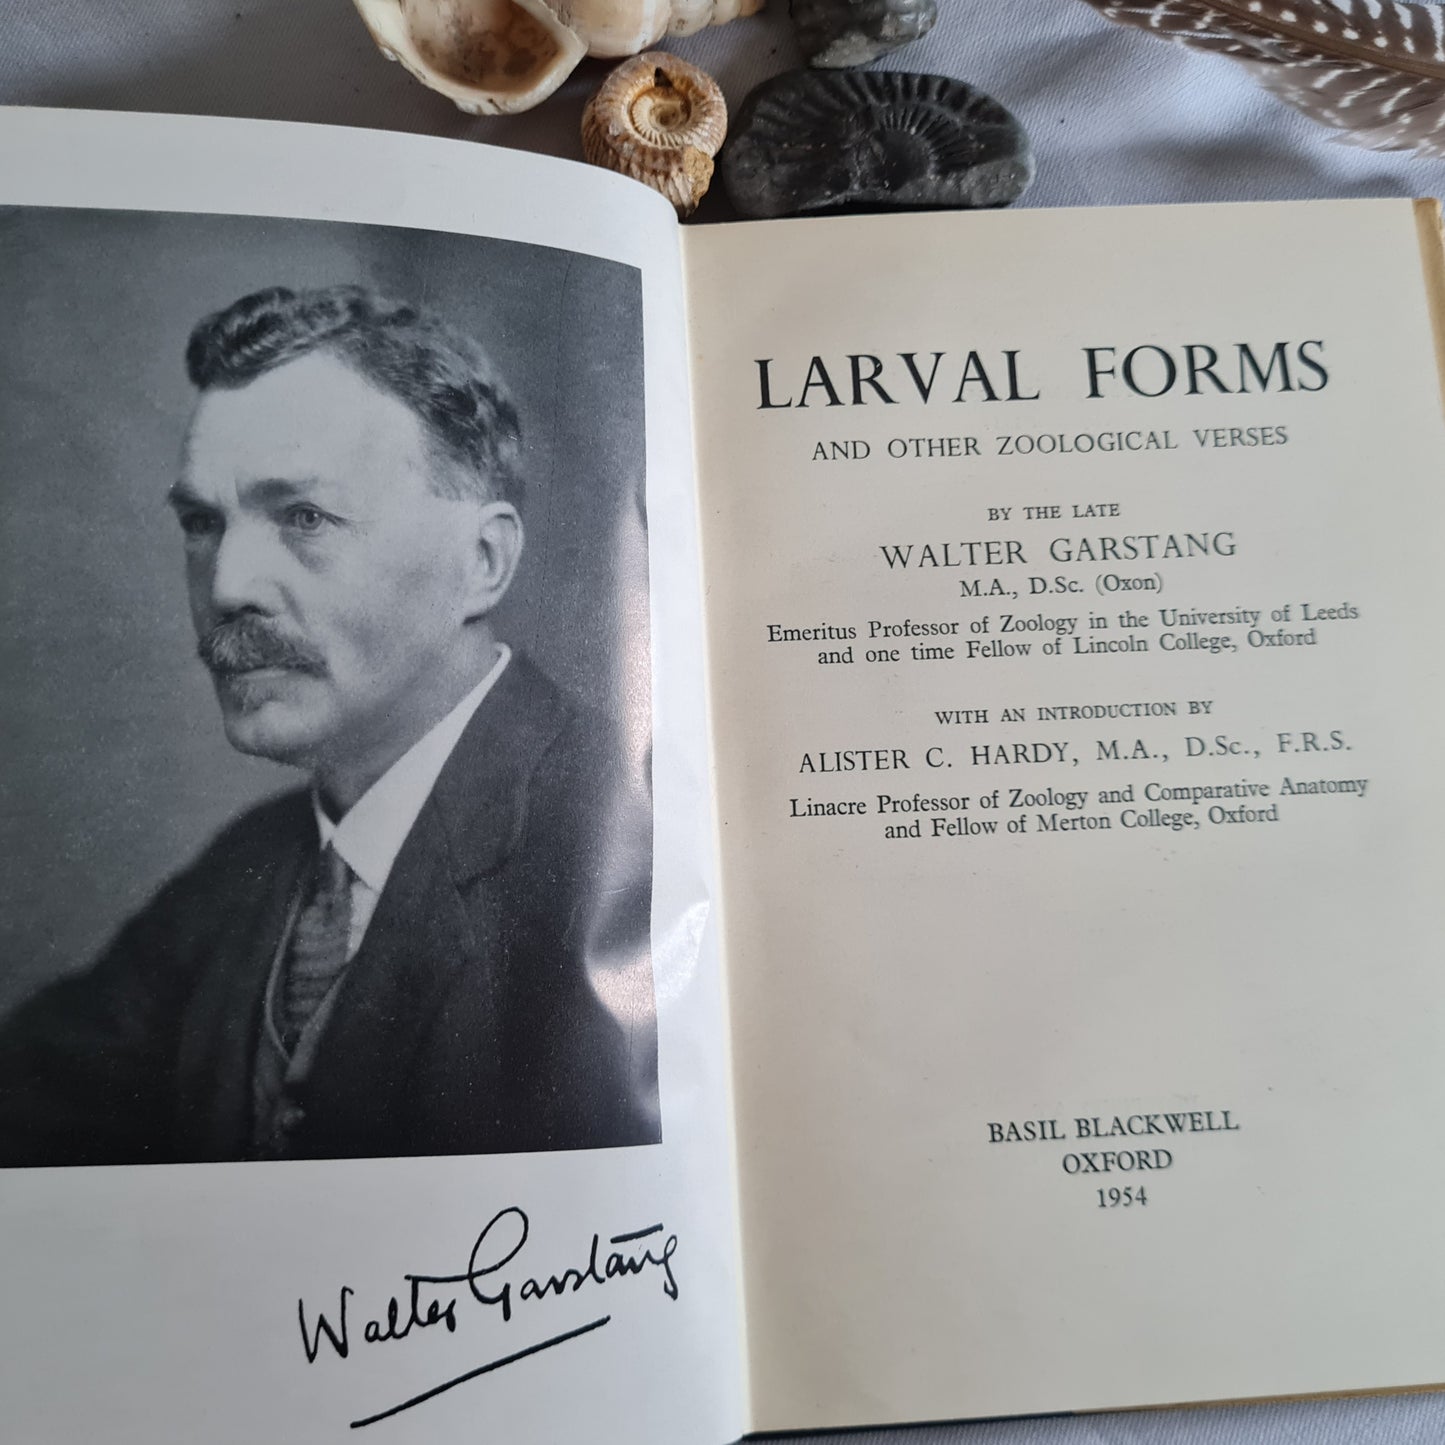 1954 Larval Form and Other Zoological Verse by Walter Garstang / Basil Blackwell, Oxford / In Very Good Condition